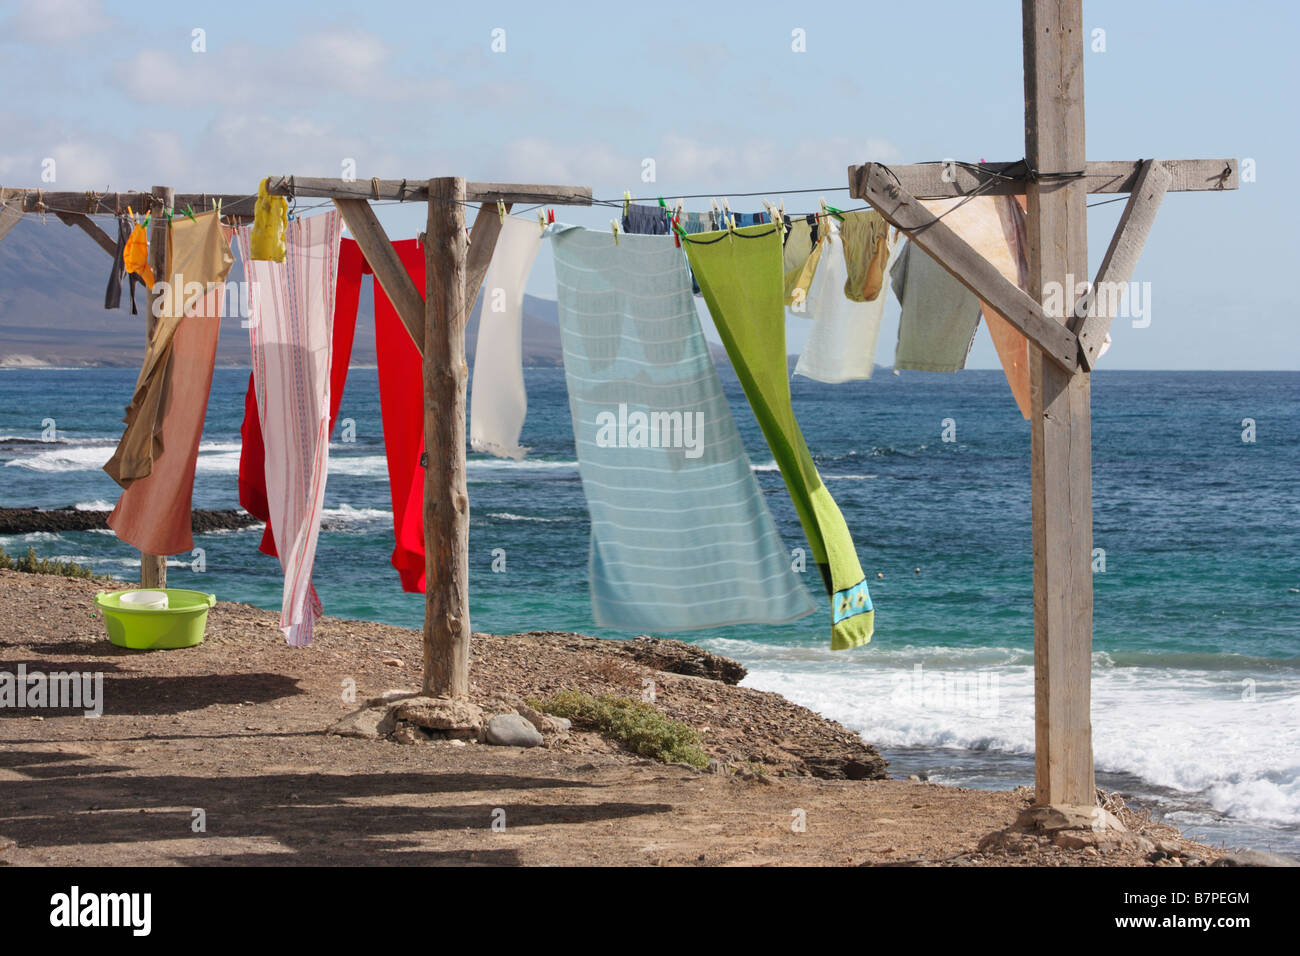 Washing on line on Fuerteventura island in the canary islands Spain Stock Photo